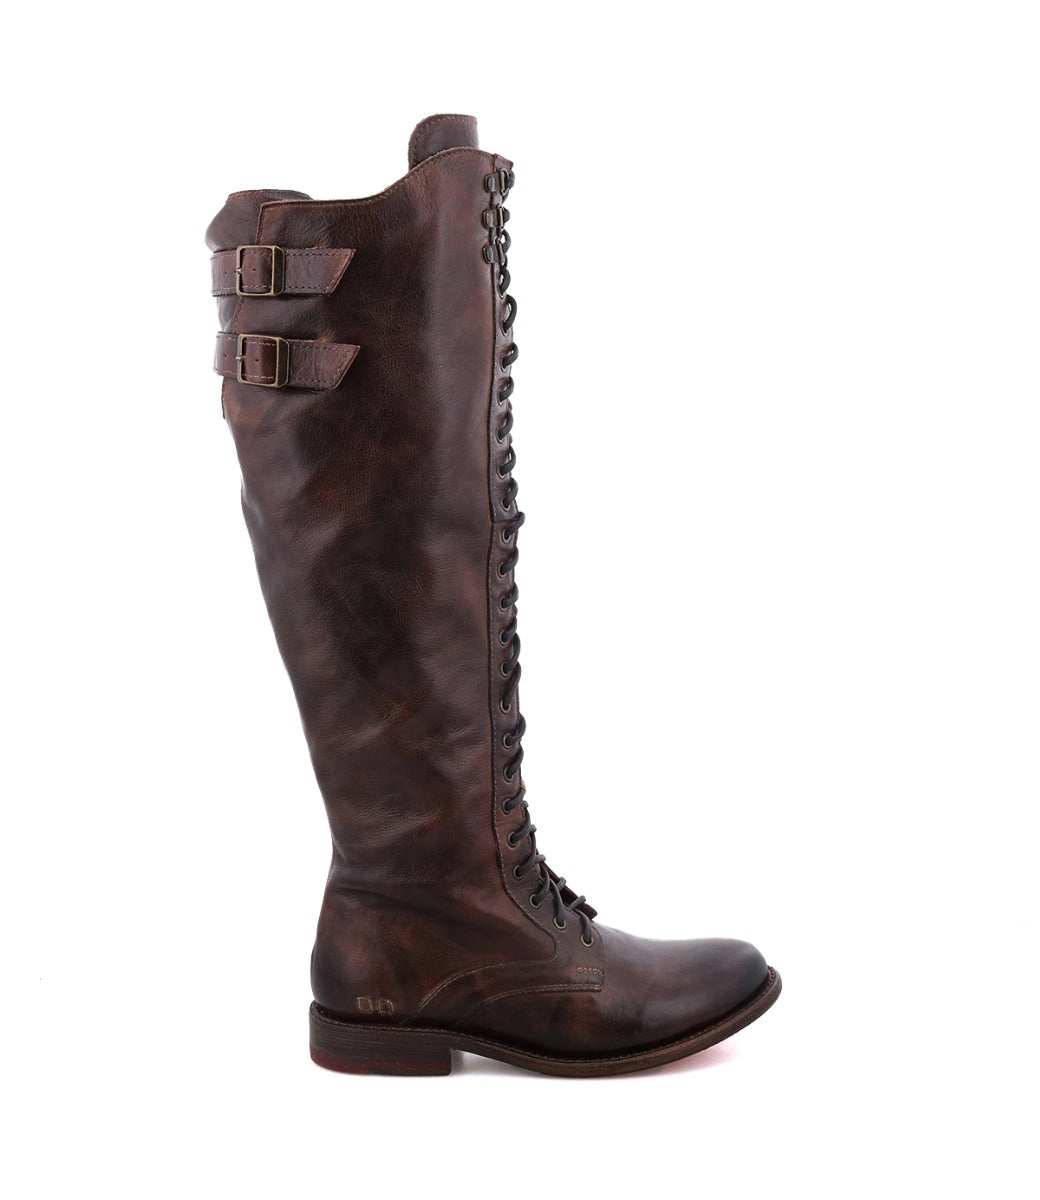 A women's brown boot with buckles and laces, the Della from Bed Stu.